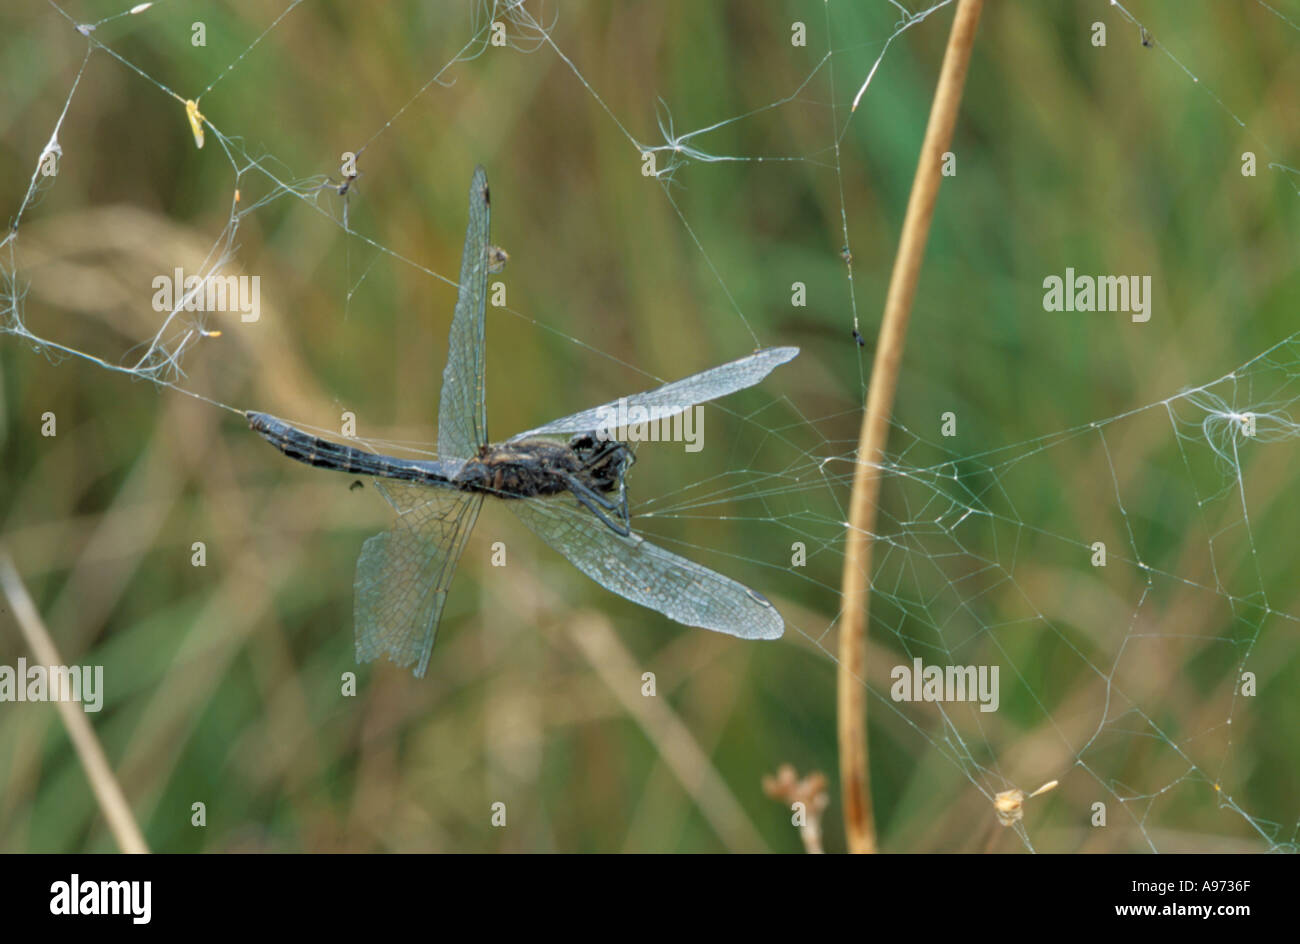 Black darter dragonfly (Sympetrum scoticum) caught in a spider's web Stock Photo